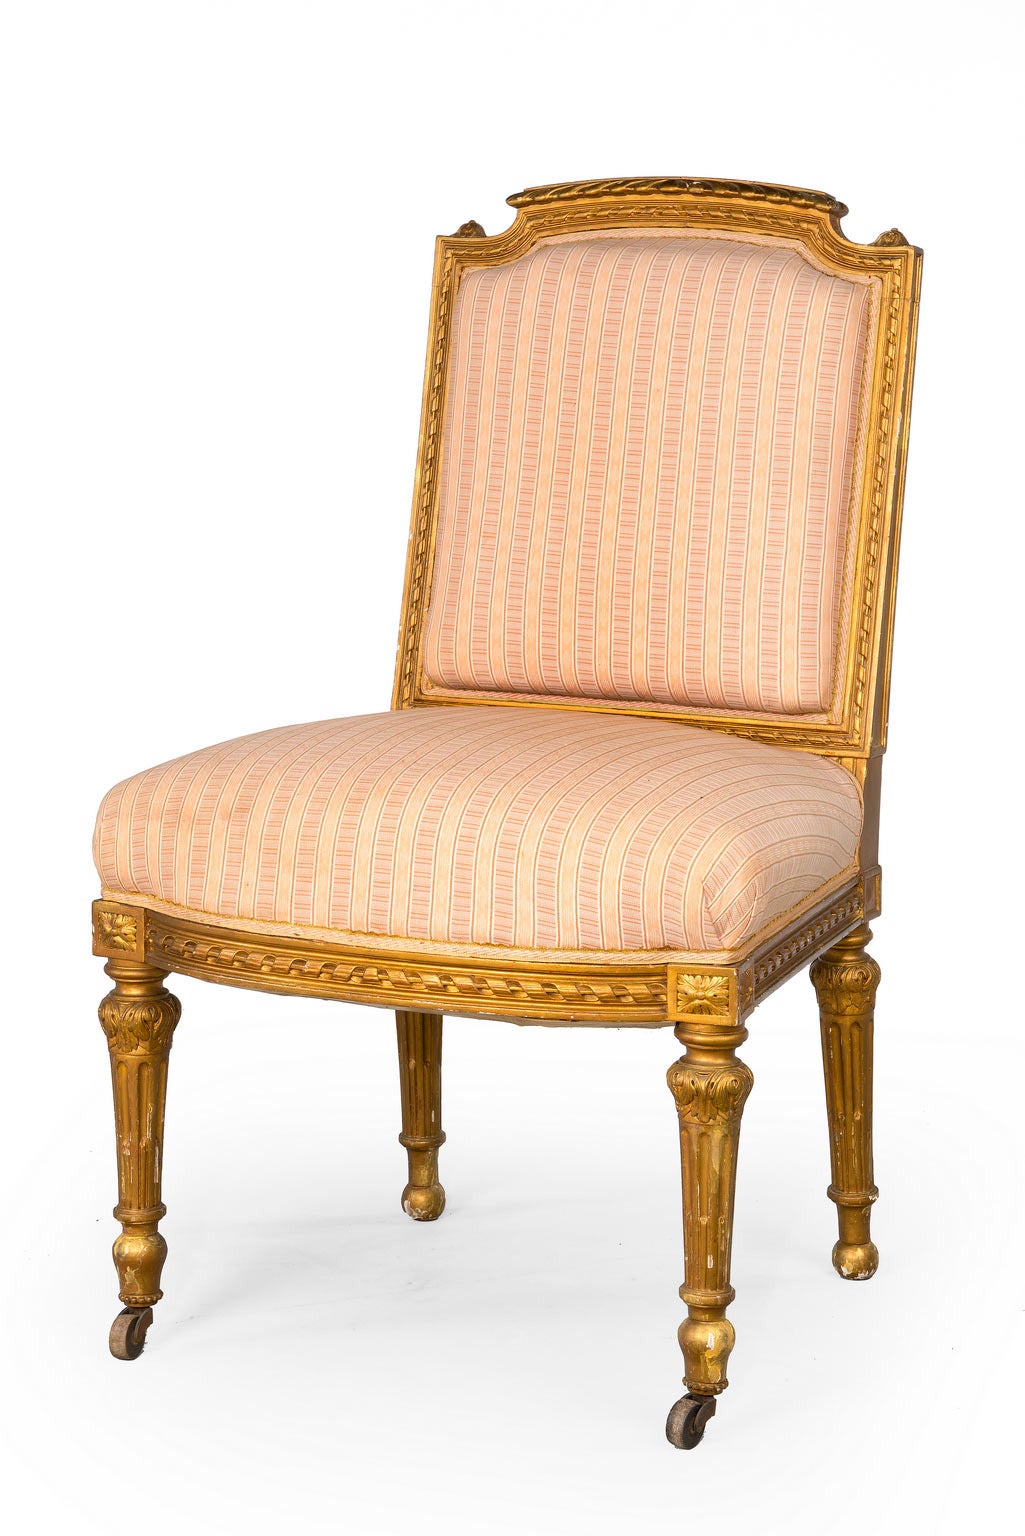 A Pair of Gilt Wood Single Chairs with Bow front rails incorporating Victorian scrolls, turned and reeded supports. The gilding replaced and now patinated.
